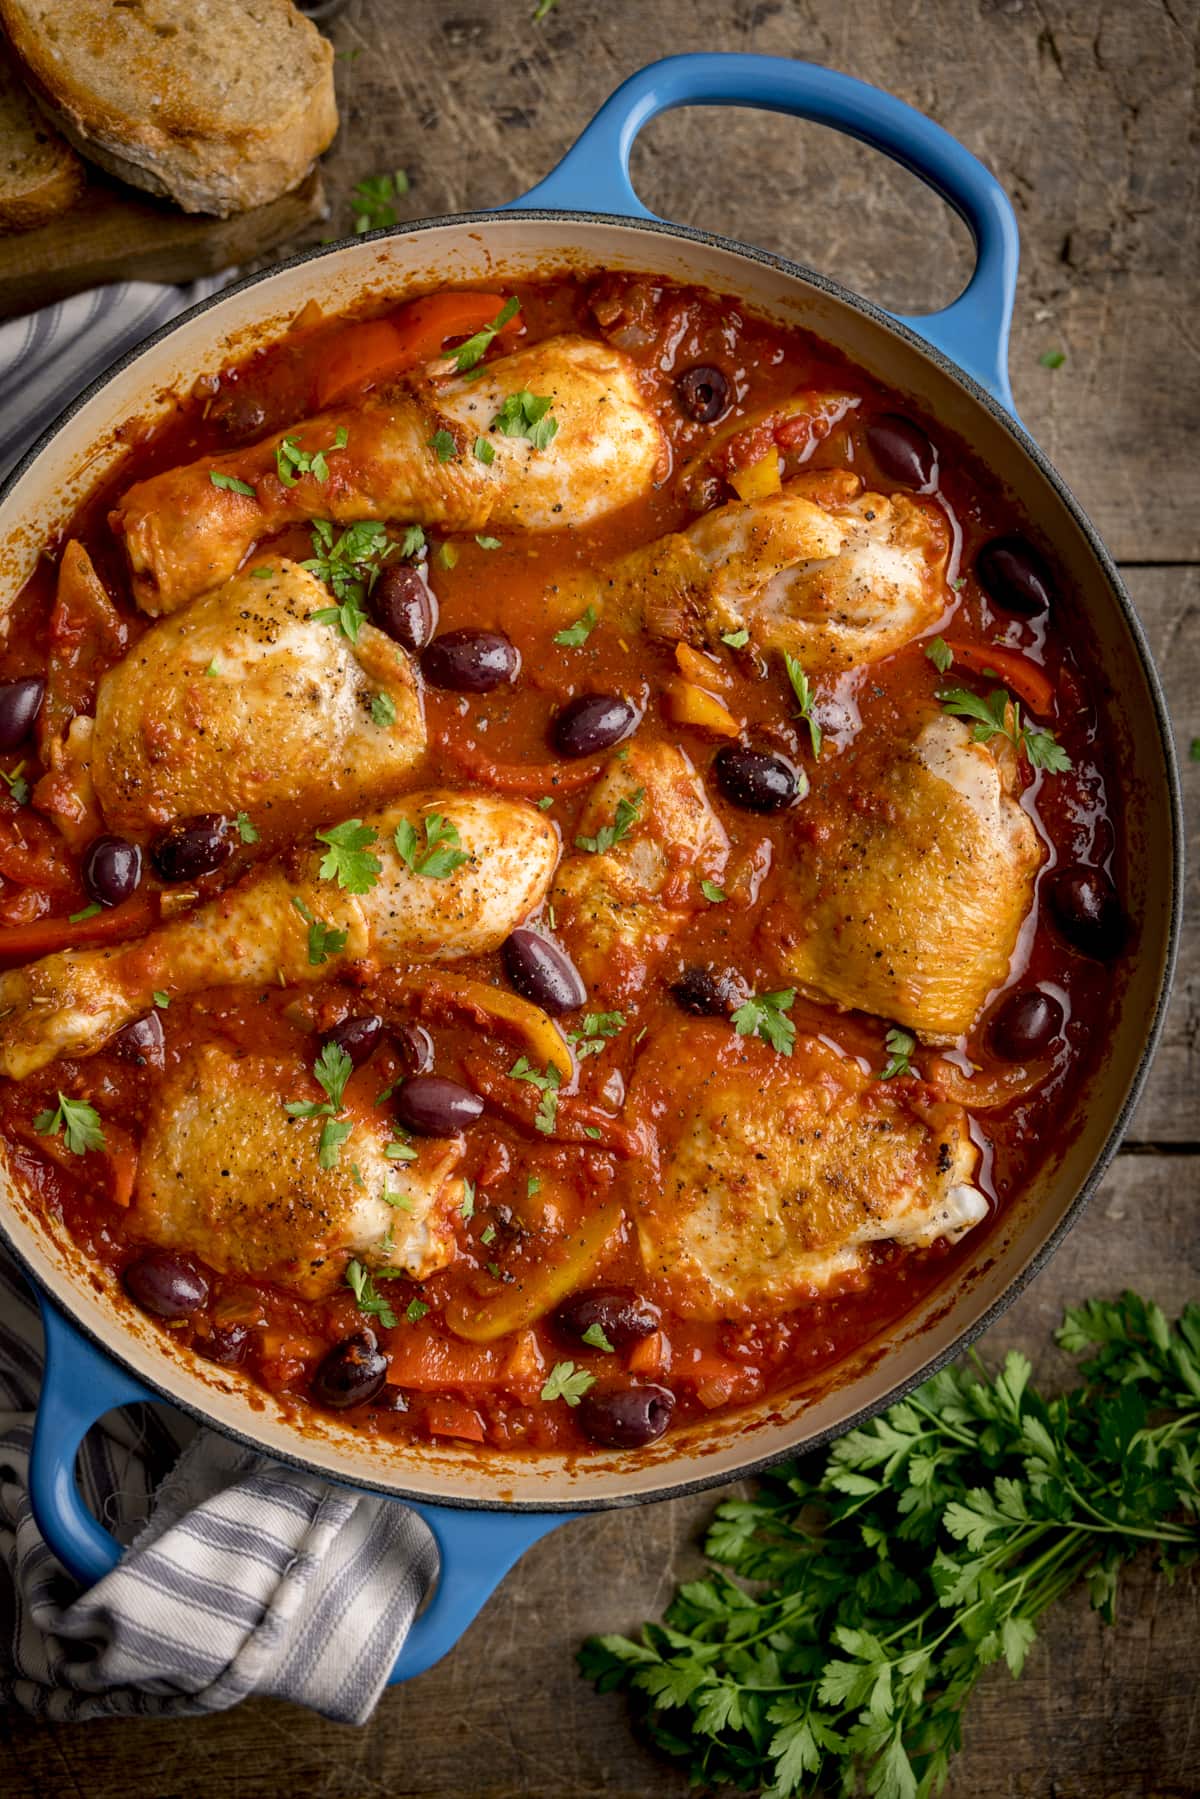 Overhead image of chicken cacciatore in a large, shallow blue casserole dish. The dish is on a wooden table, next to some fresh herbs and sliced bread.